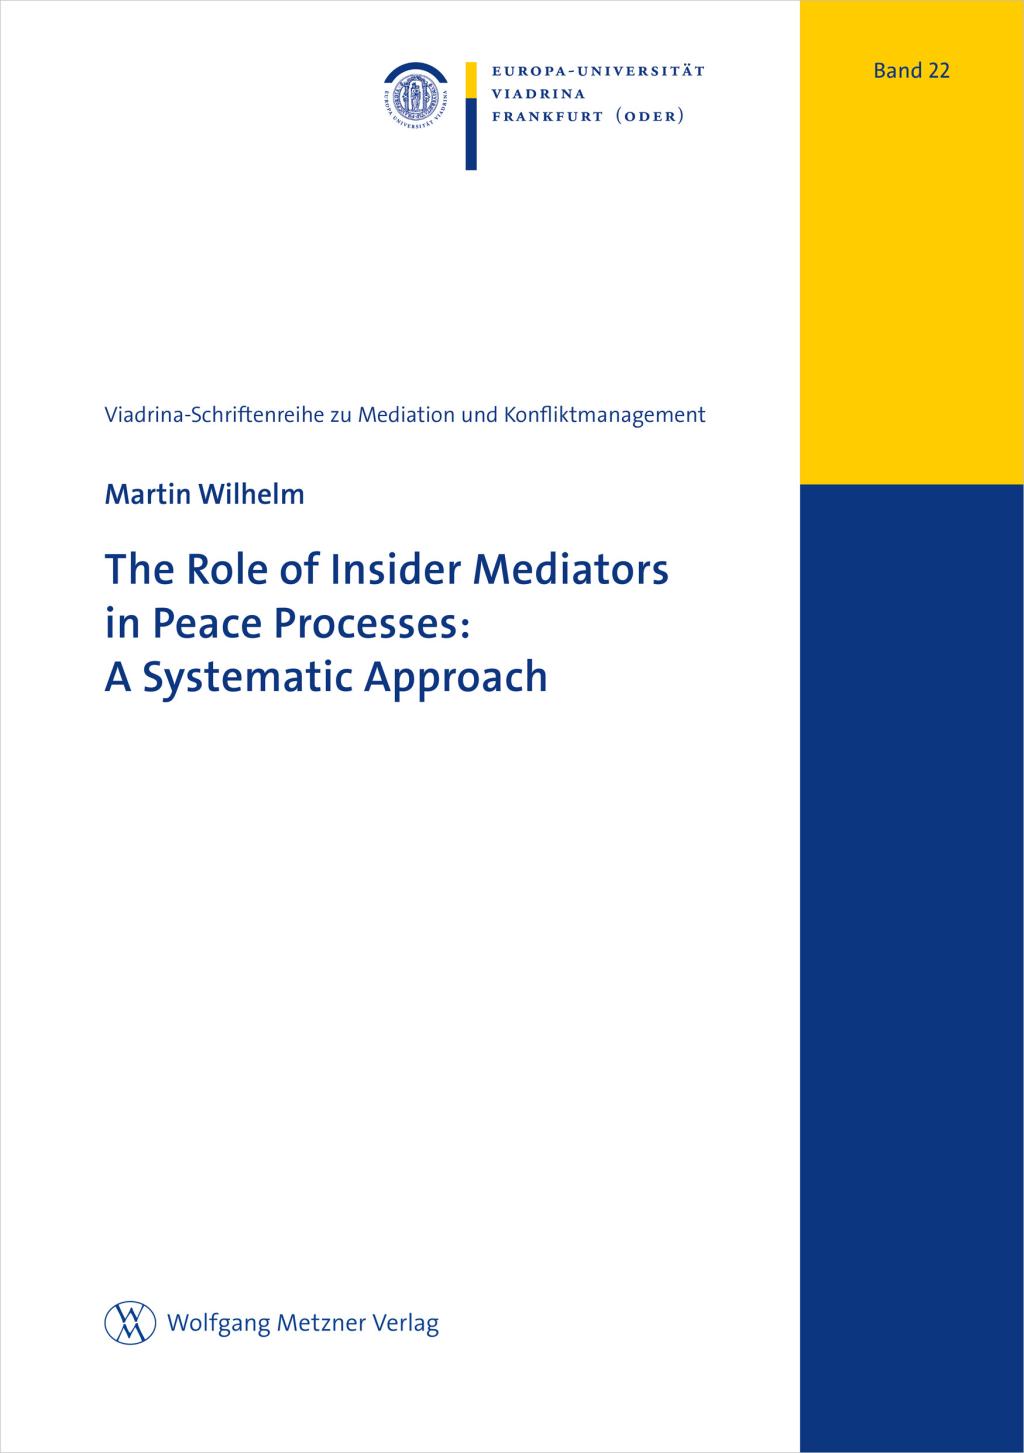 The Role of Insider Mediators in Peace Processes: A Systematic Approach